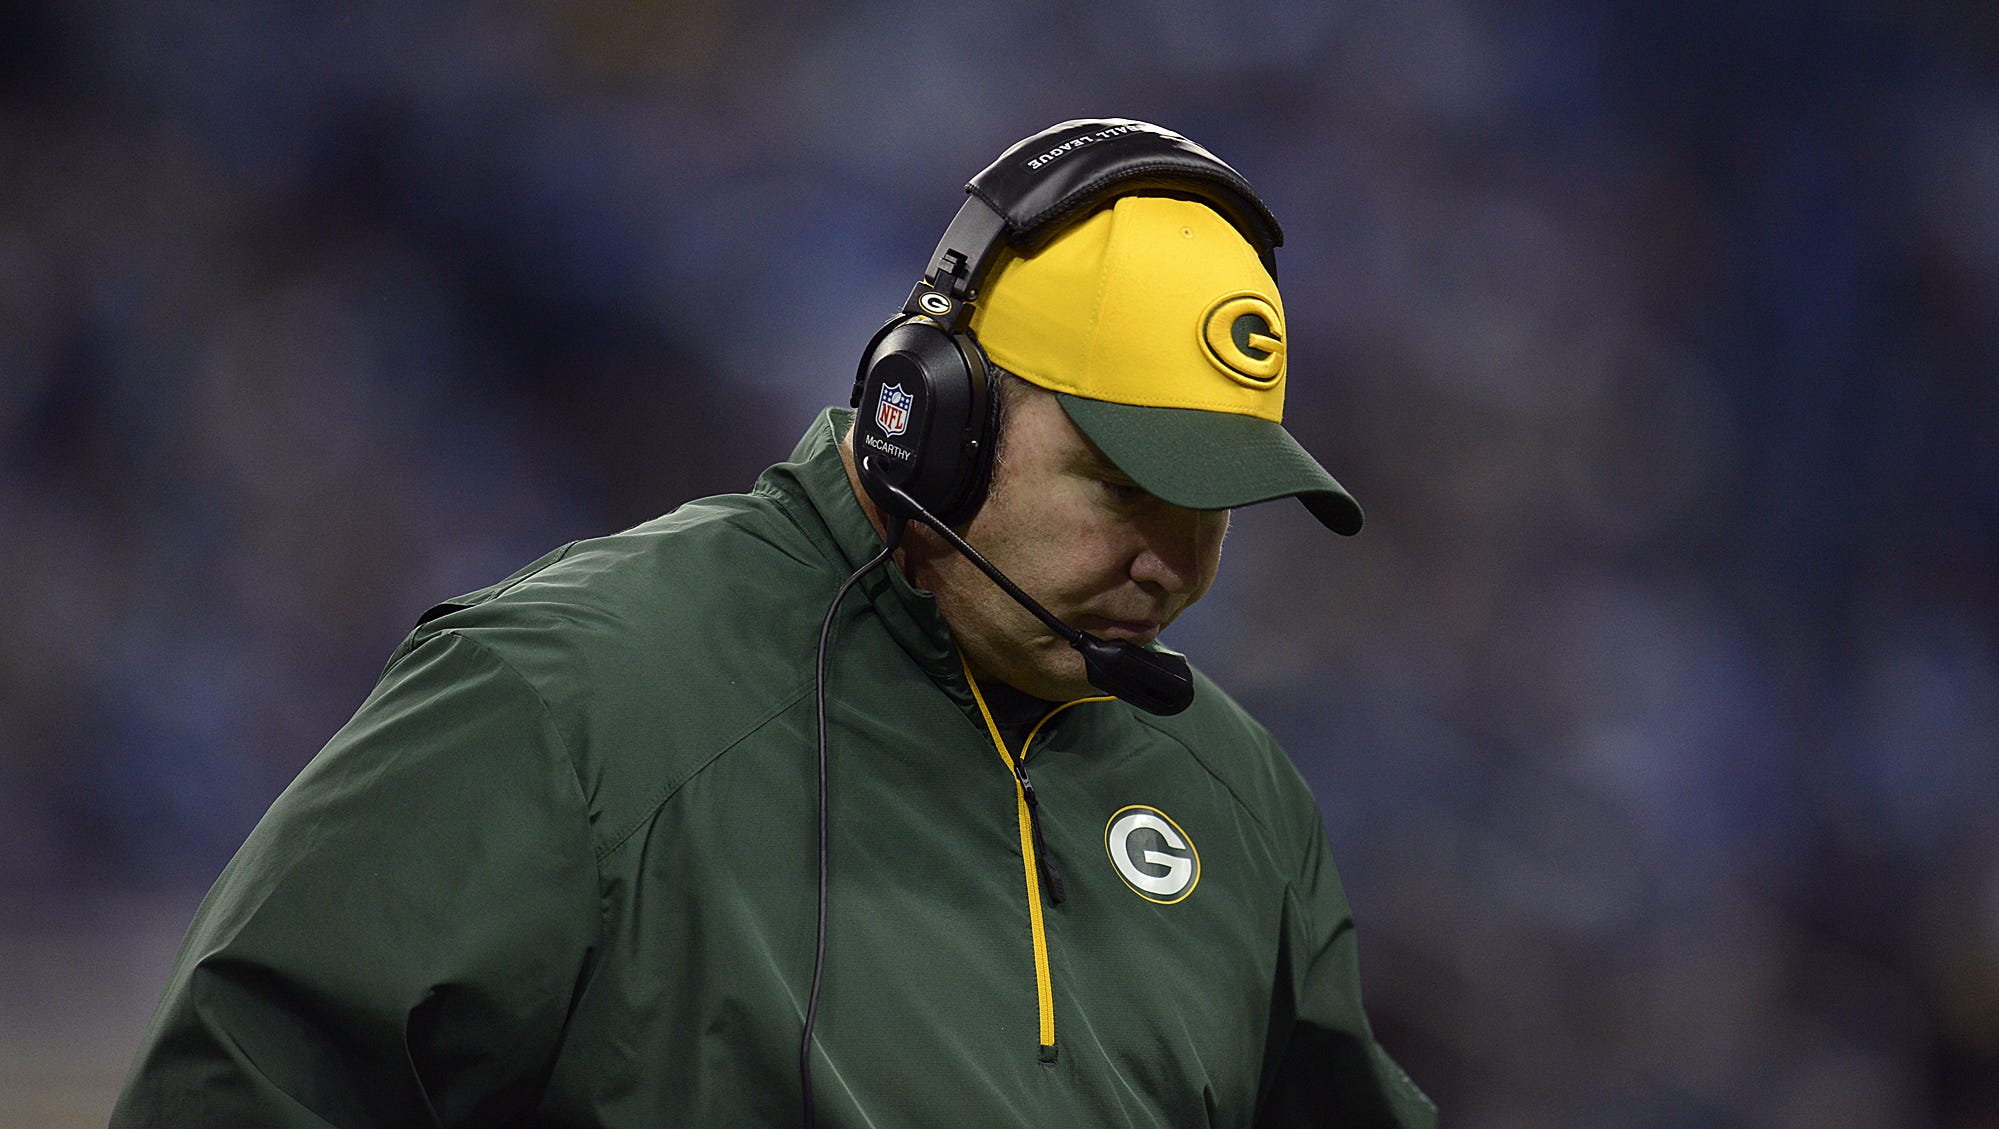 Green Bay Packers coach Mike McCarthy reacts in the fourth quarter of his team's 40-10 loss to the Detroit Lions on Thanksgiving Day 2013 at Ford Field in Detroit.